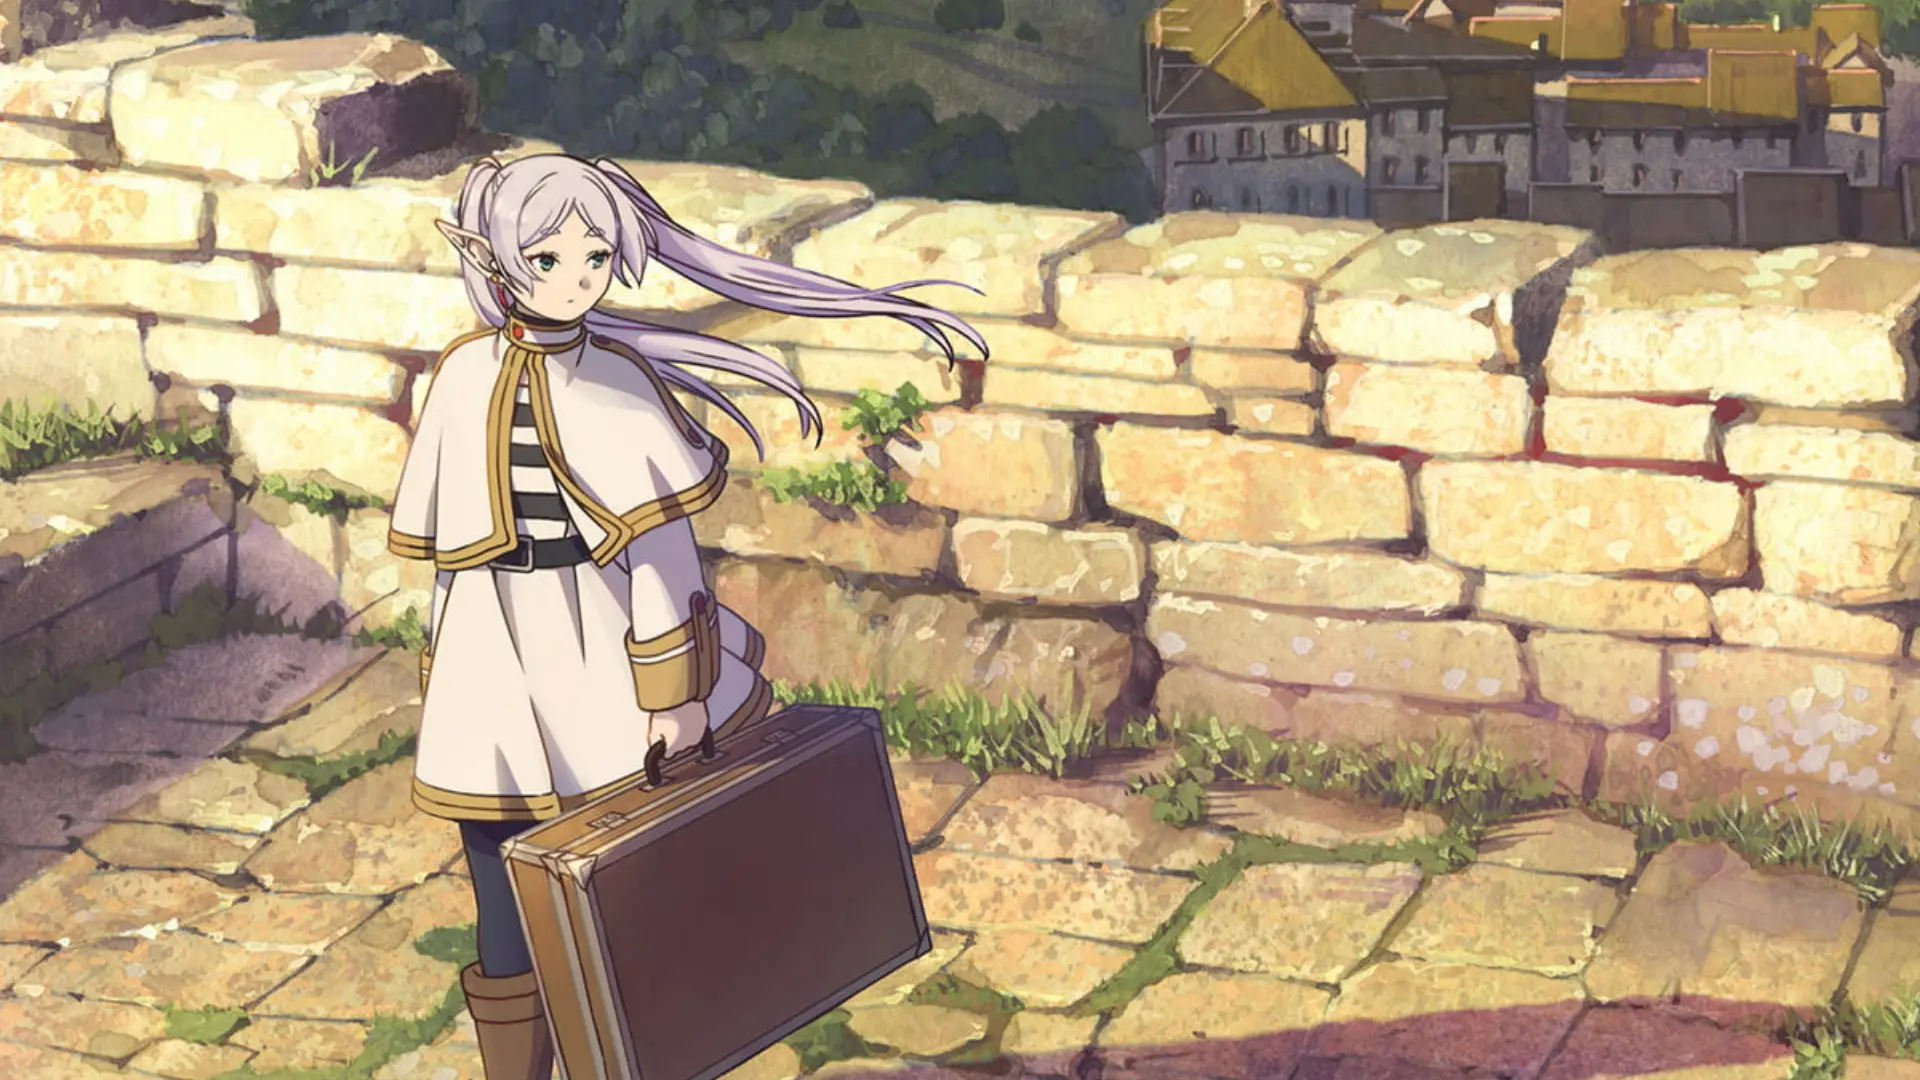 Frieren, a white-haired Elf girl, standing holding a suitcase.